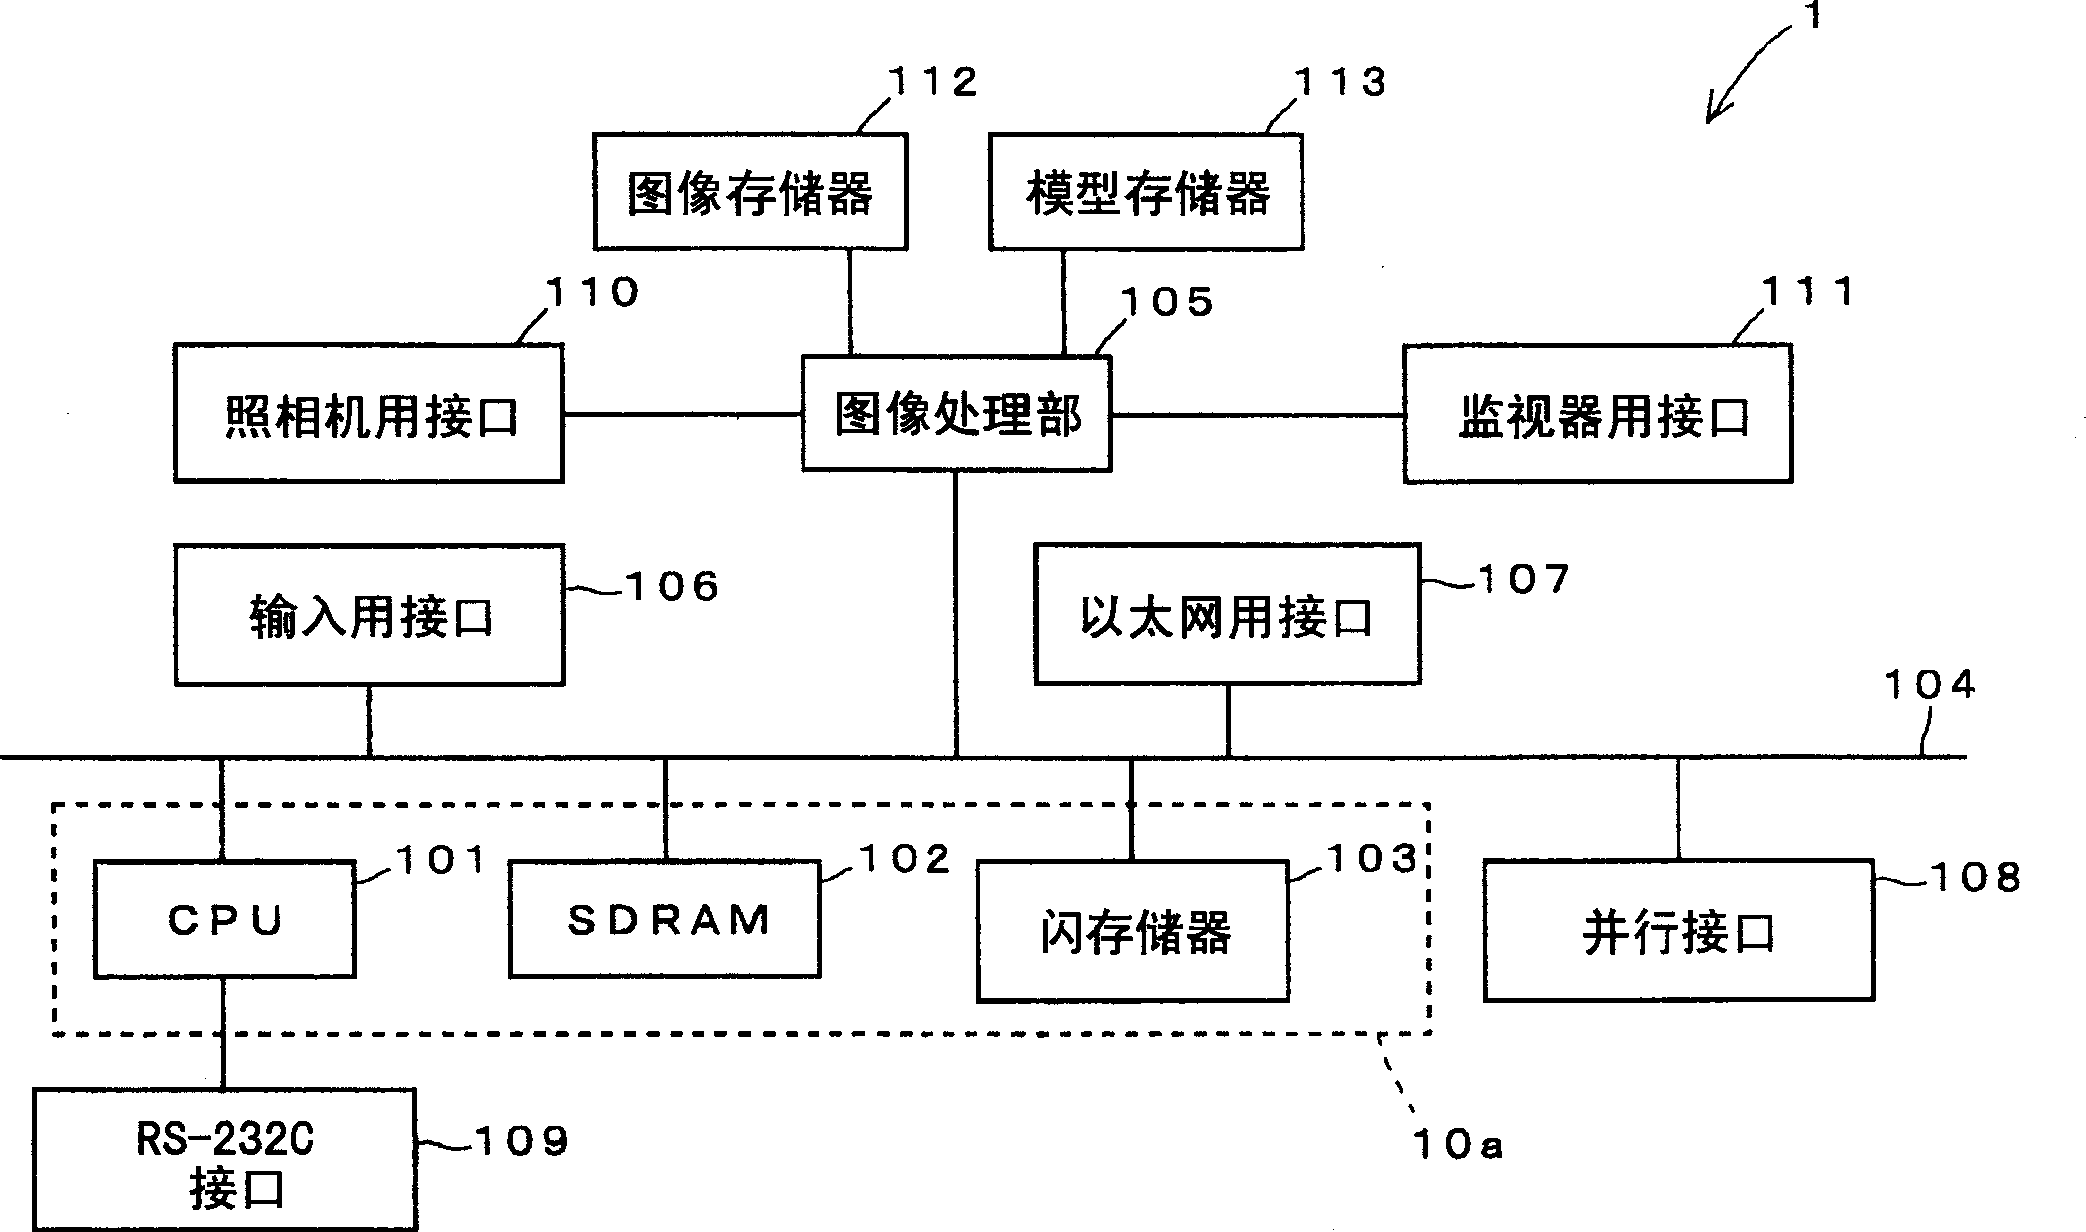 Image processing system, method of controlling the image processing system, and program for a peripheral apparatus in the system